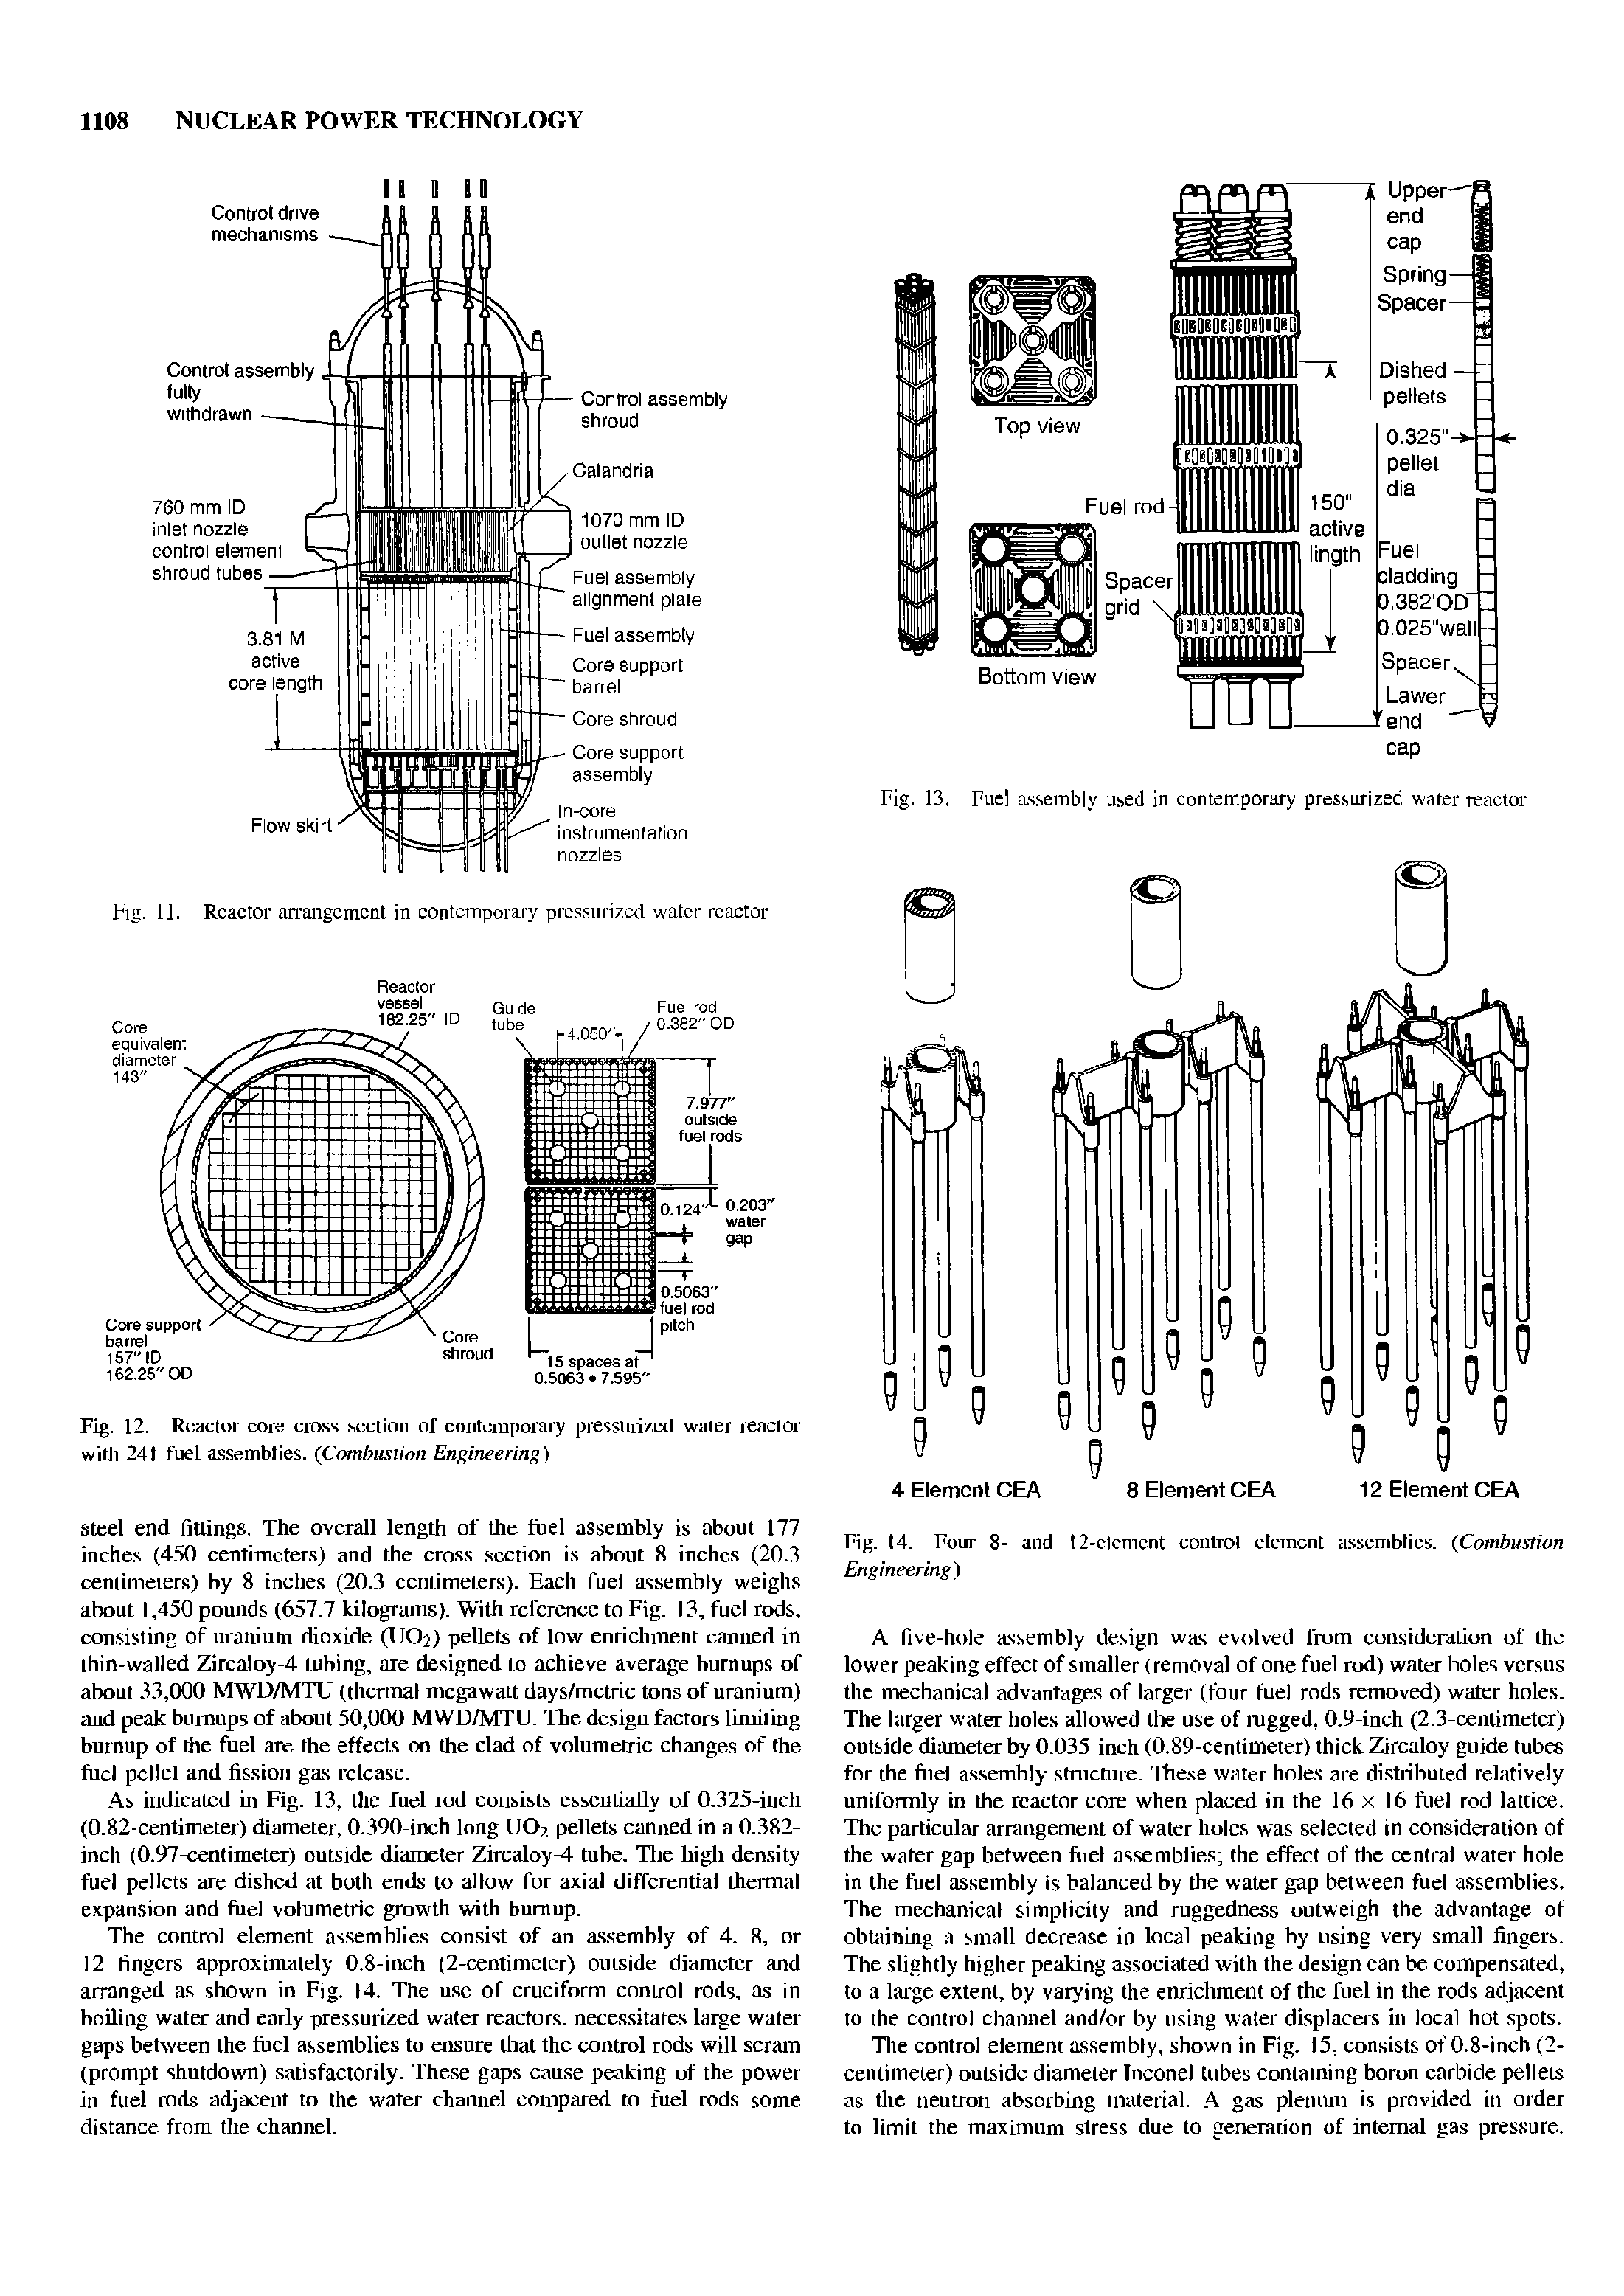 Fig. 13, Fuel assembly used in contemporary pressurized water reactor...